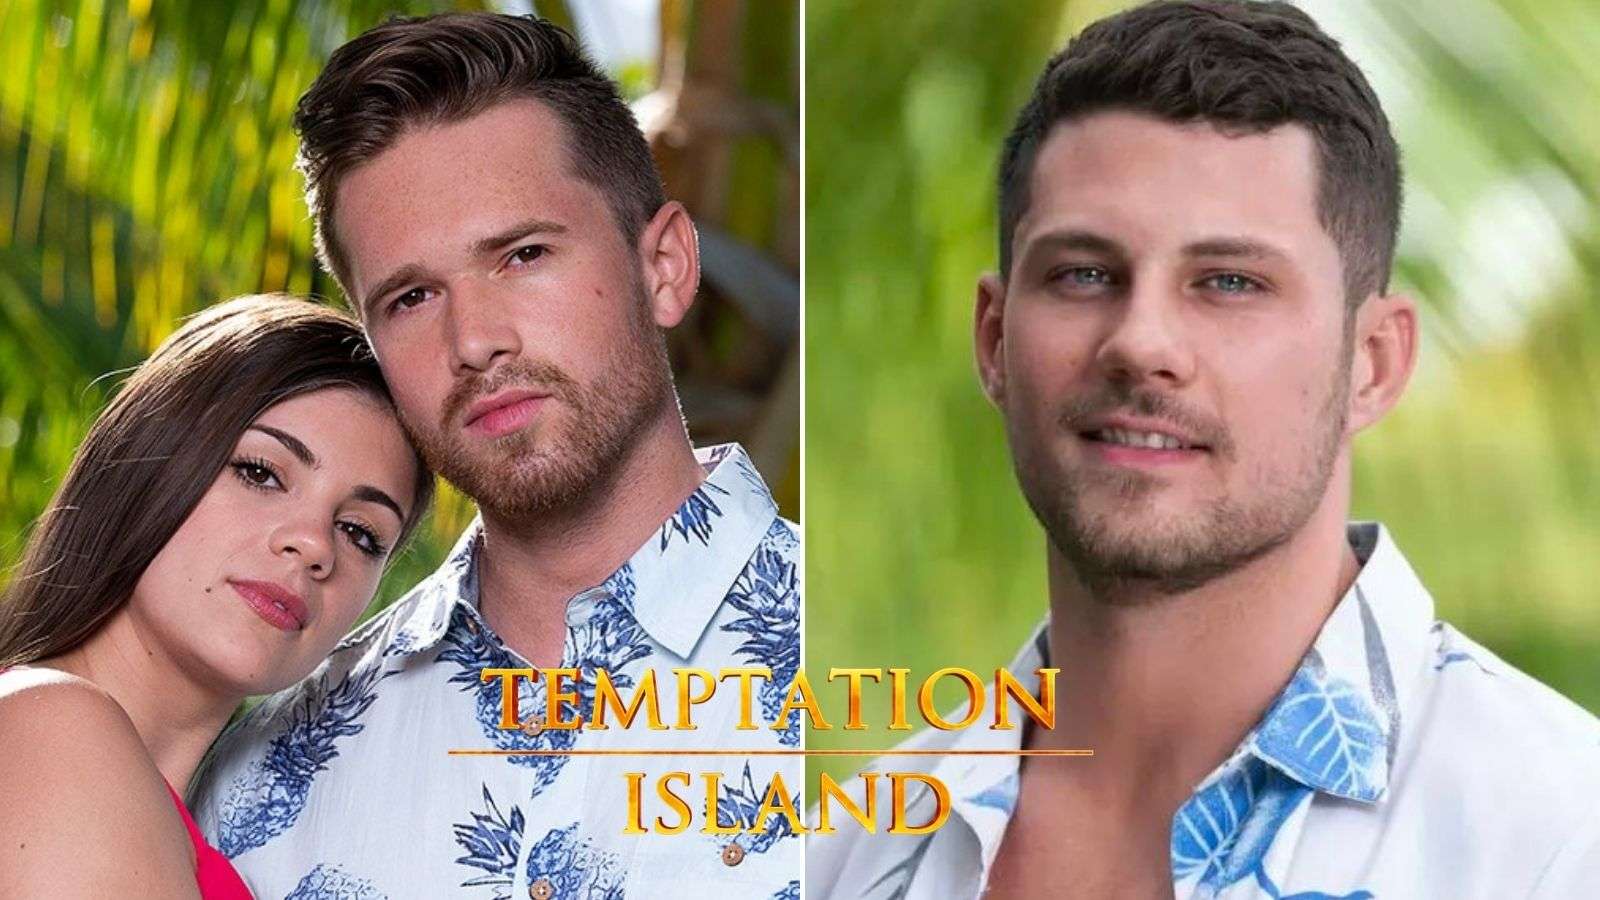 Ashley, Casey, and Ben from Temptation Island